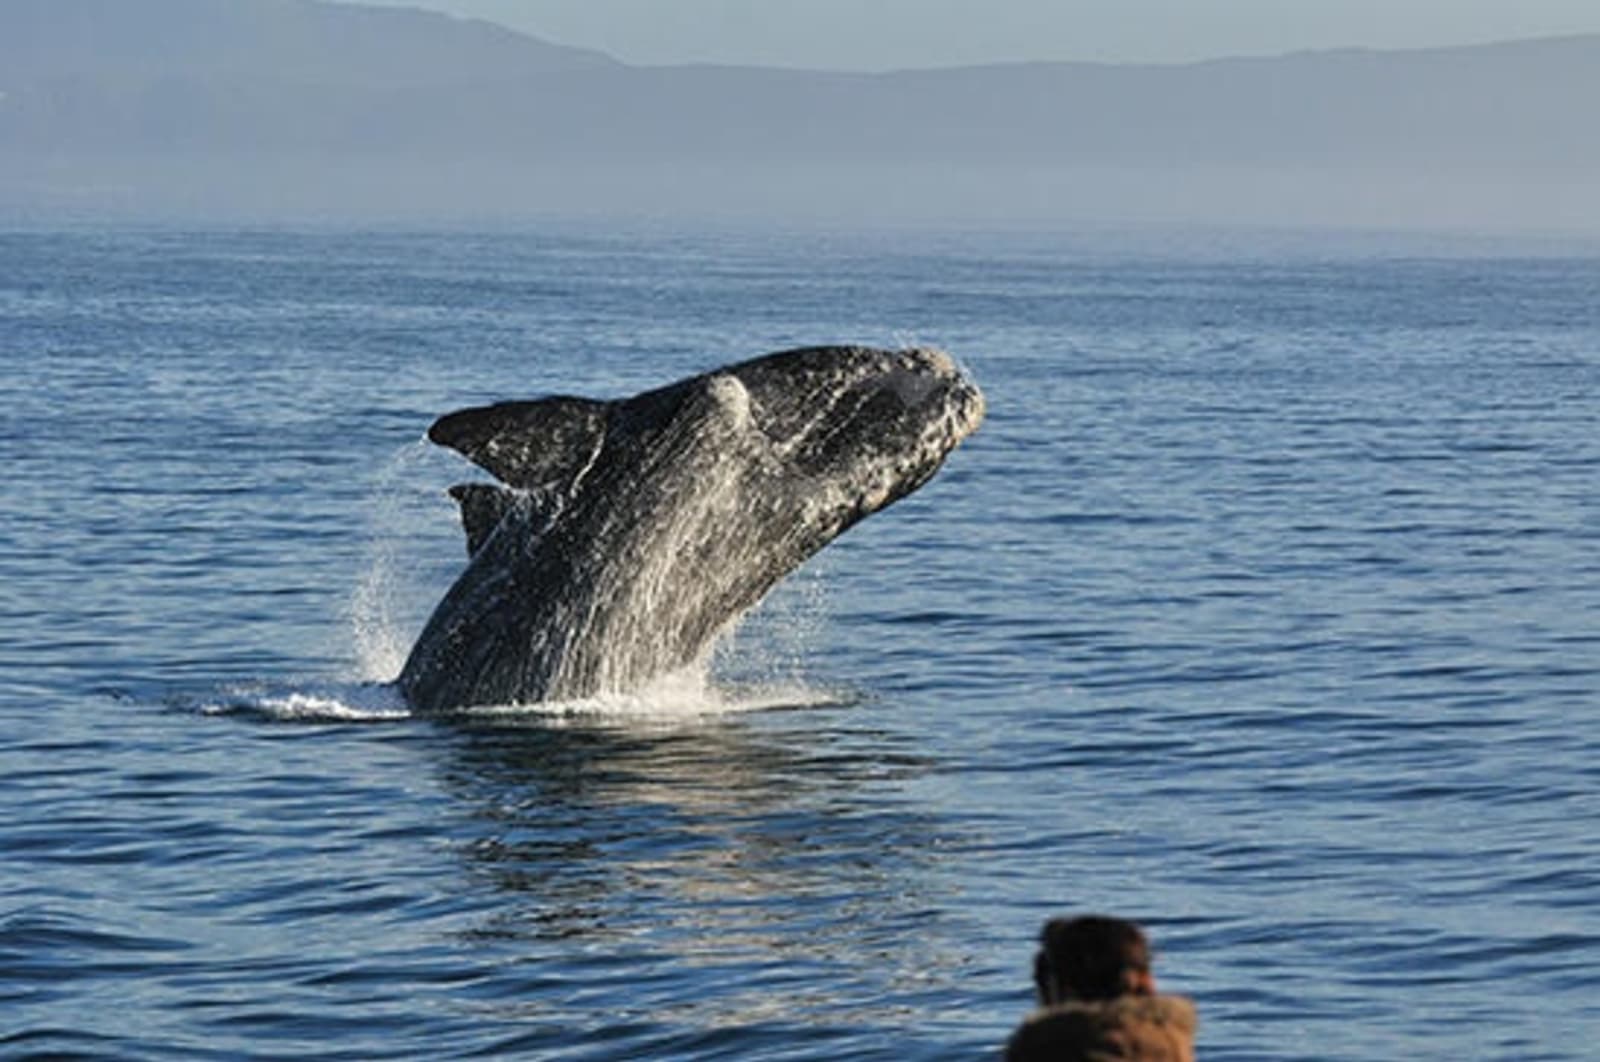 rs-southern-right-whale-breaching-walker-bayhermanussouth-africa-shutterstock166201019.jpg